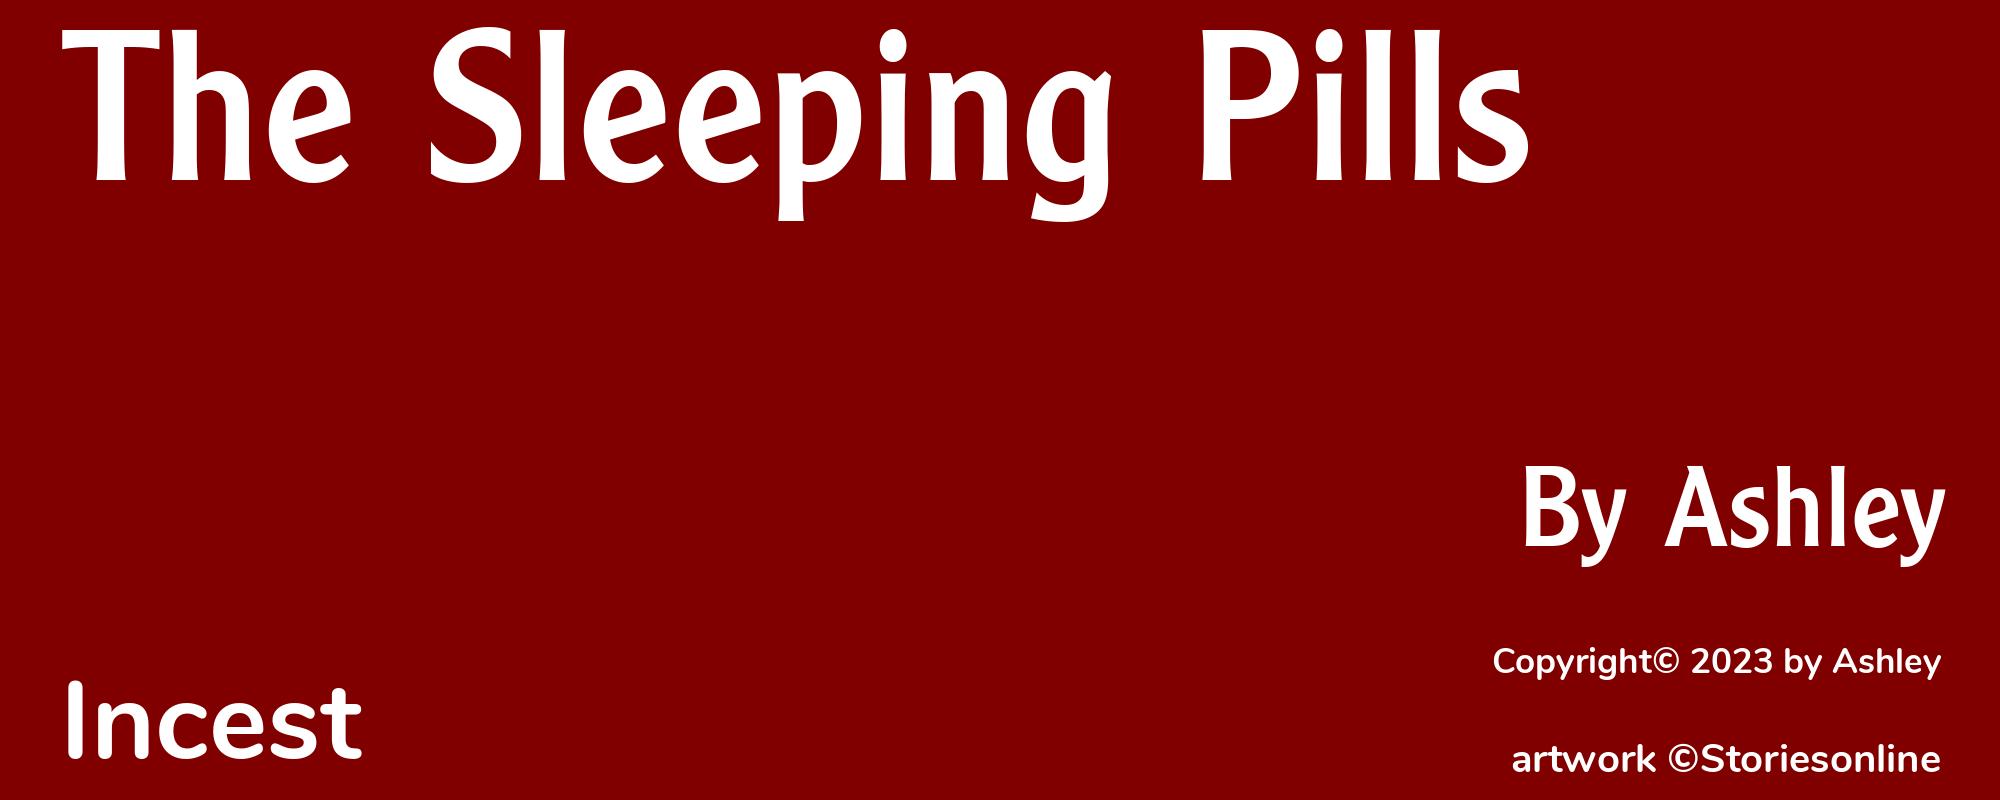 The Sleeping Pills - Cover